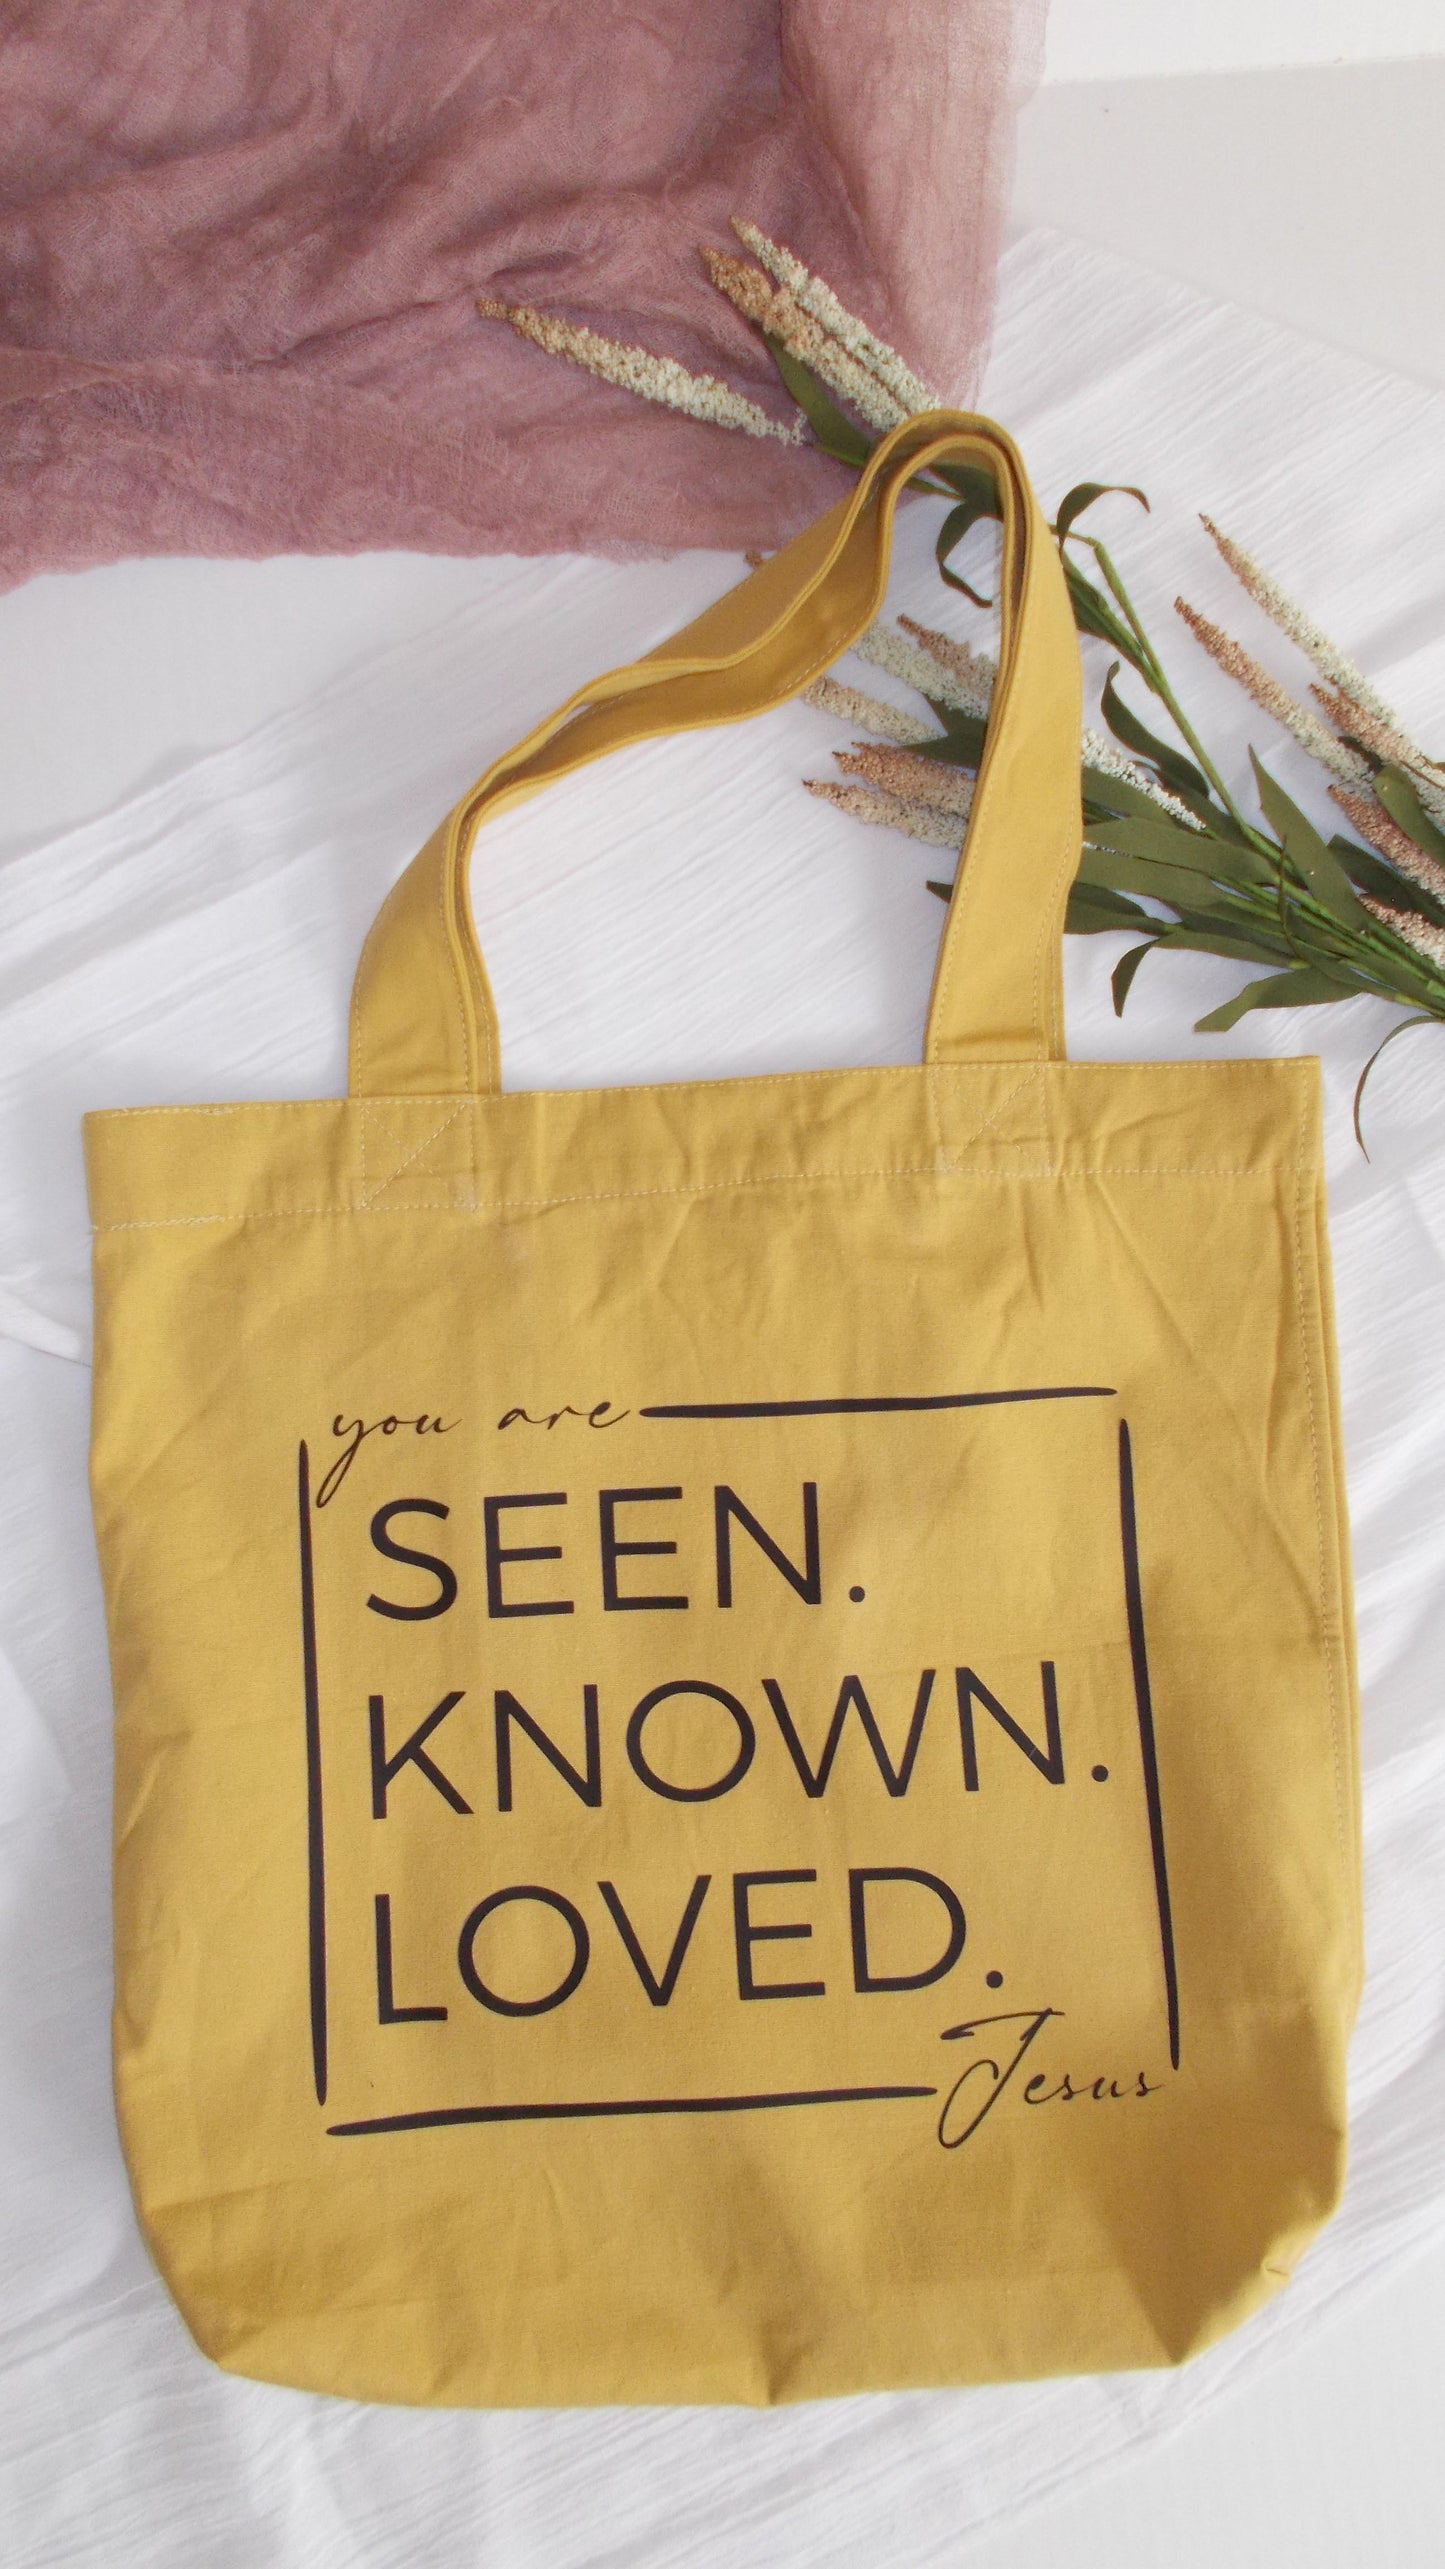 "You are Seen. Known. Loved. - Jesus." No matter what the day brings, you can carry around this message on a fashionable Mustard colored tote.